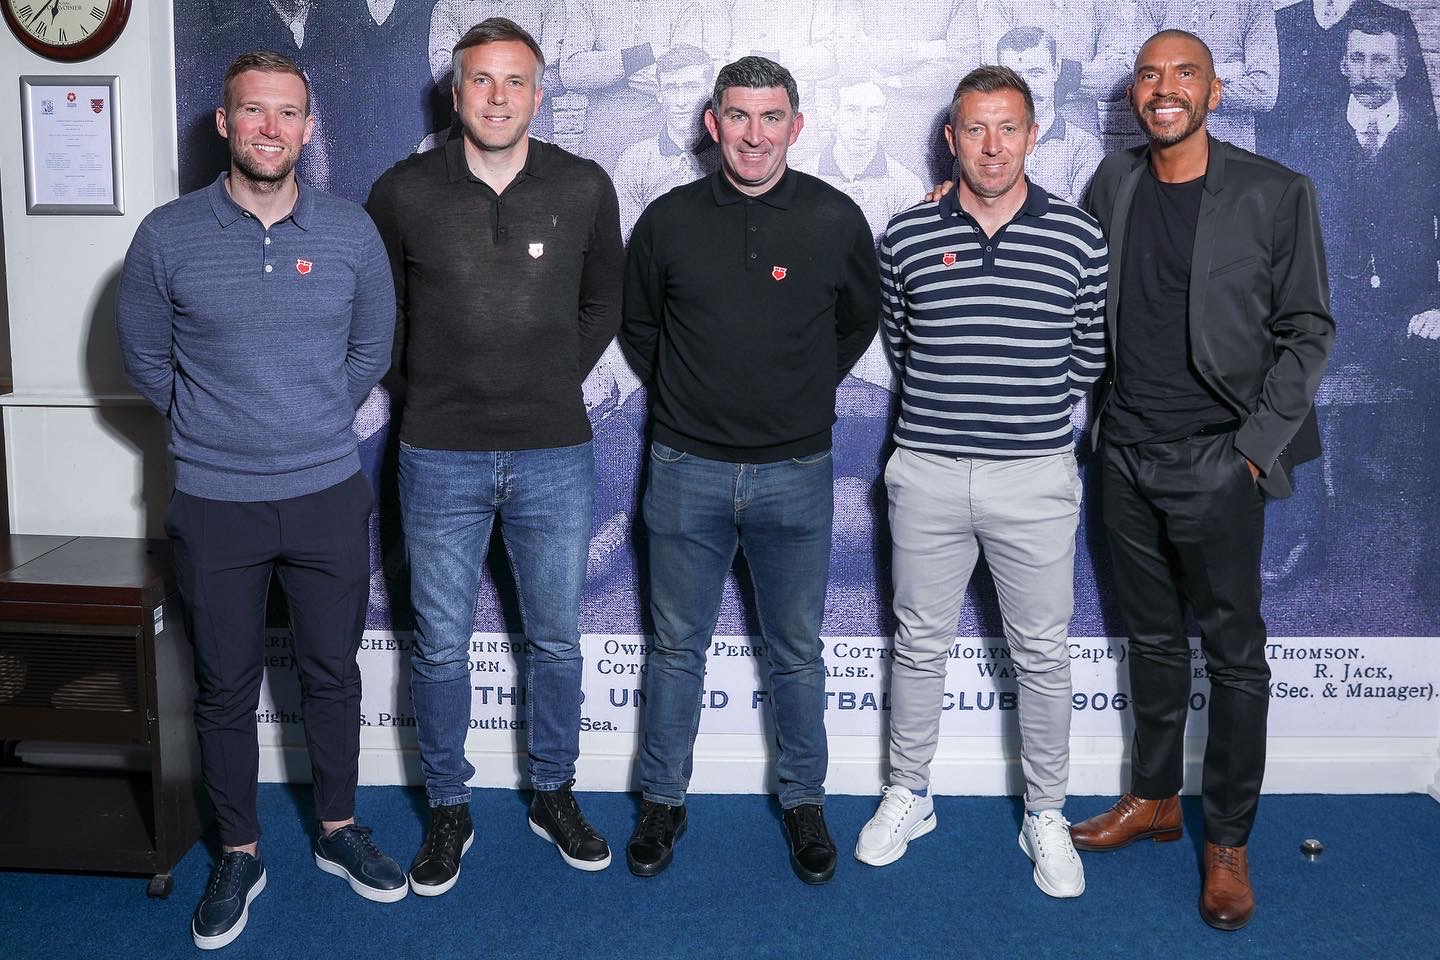 UCFB Students ‘A Night With The Southend United Management Team’ Success